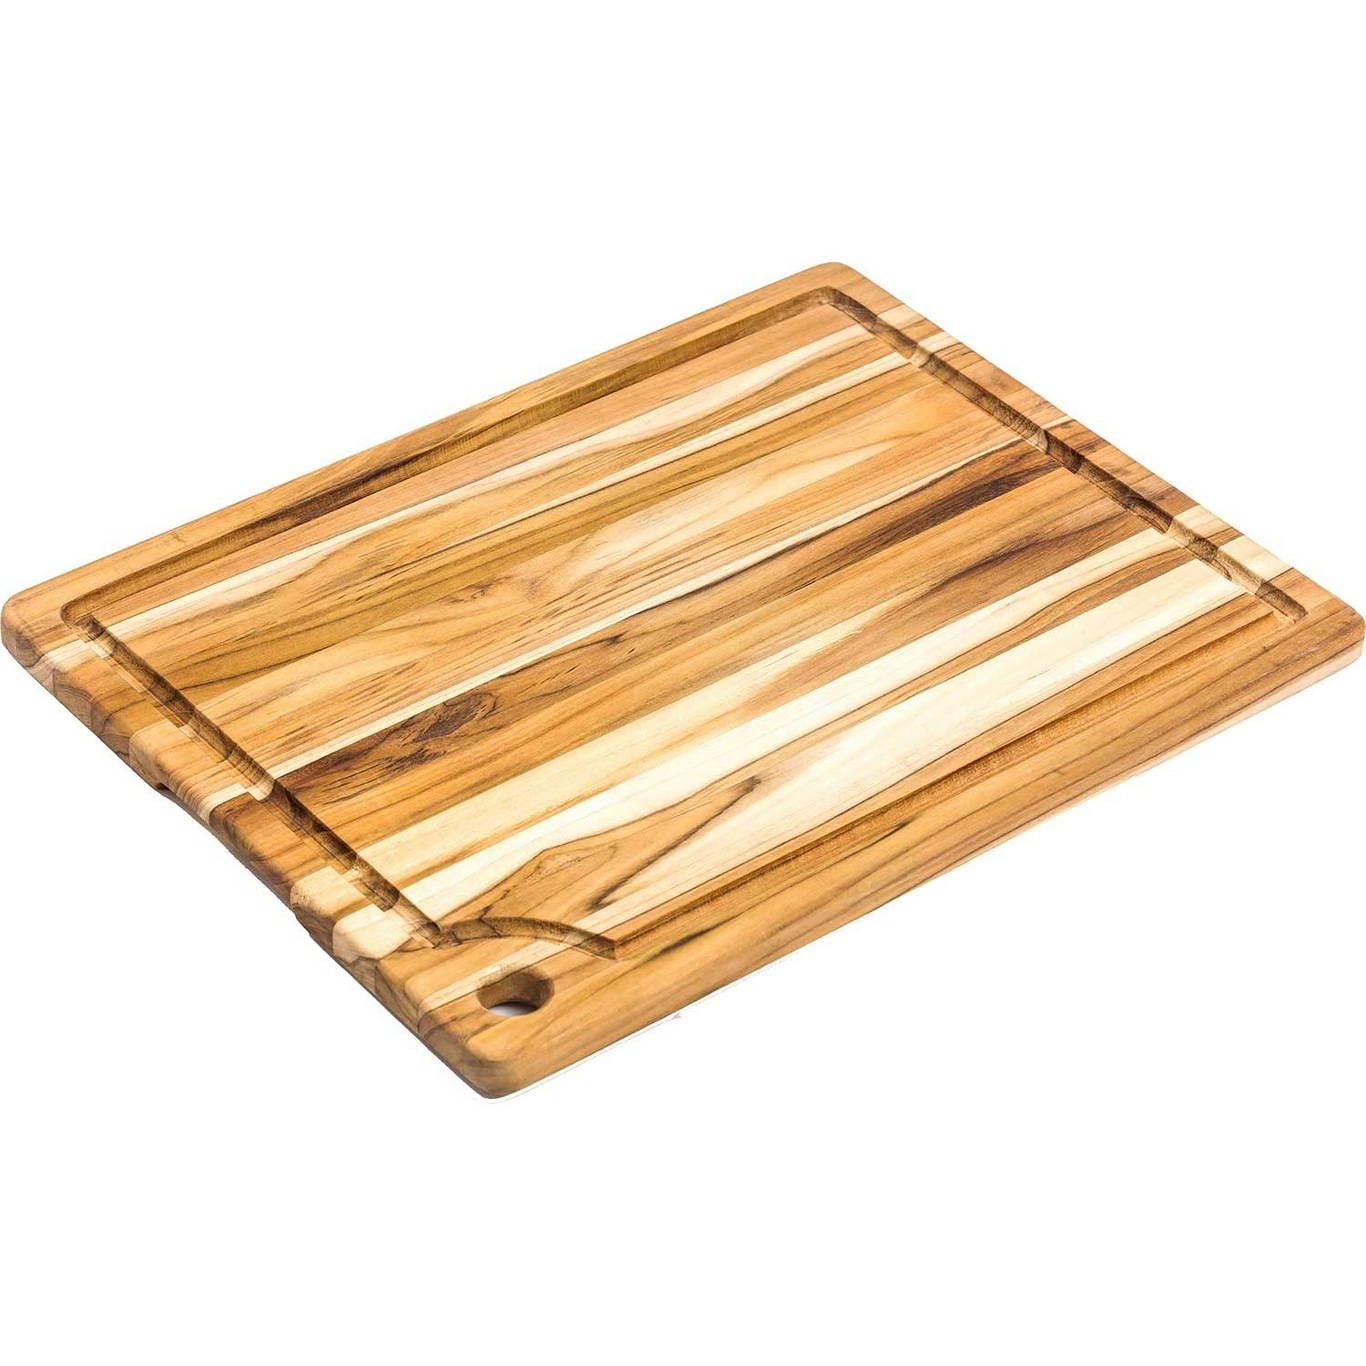 This Beautiful Wooden Corner Cutting Board Attaches Securely To